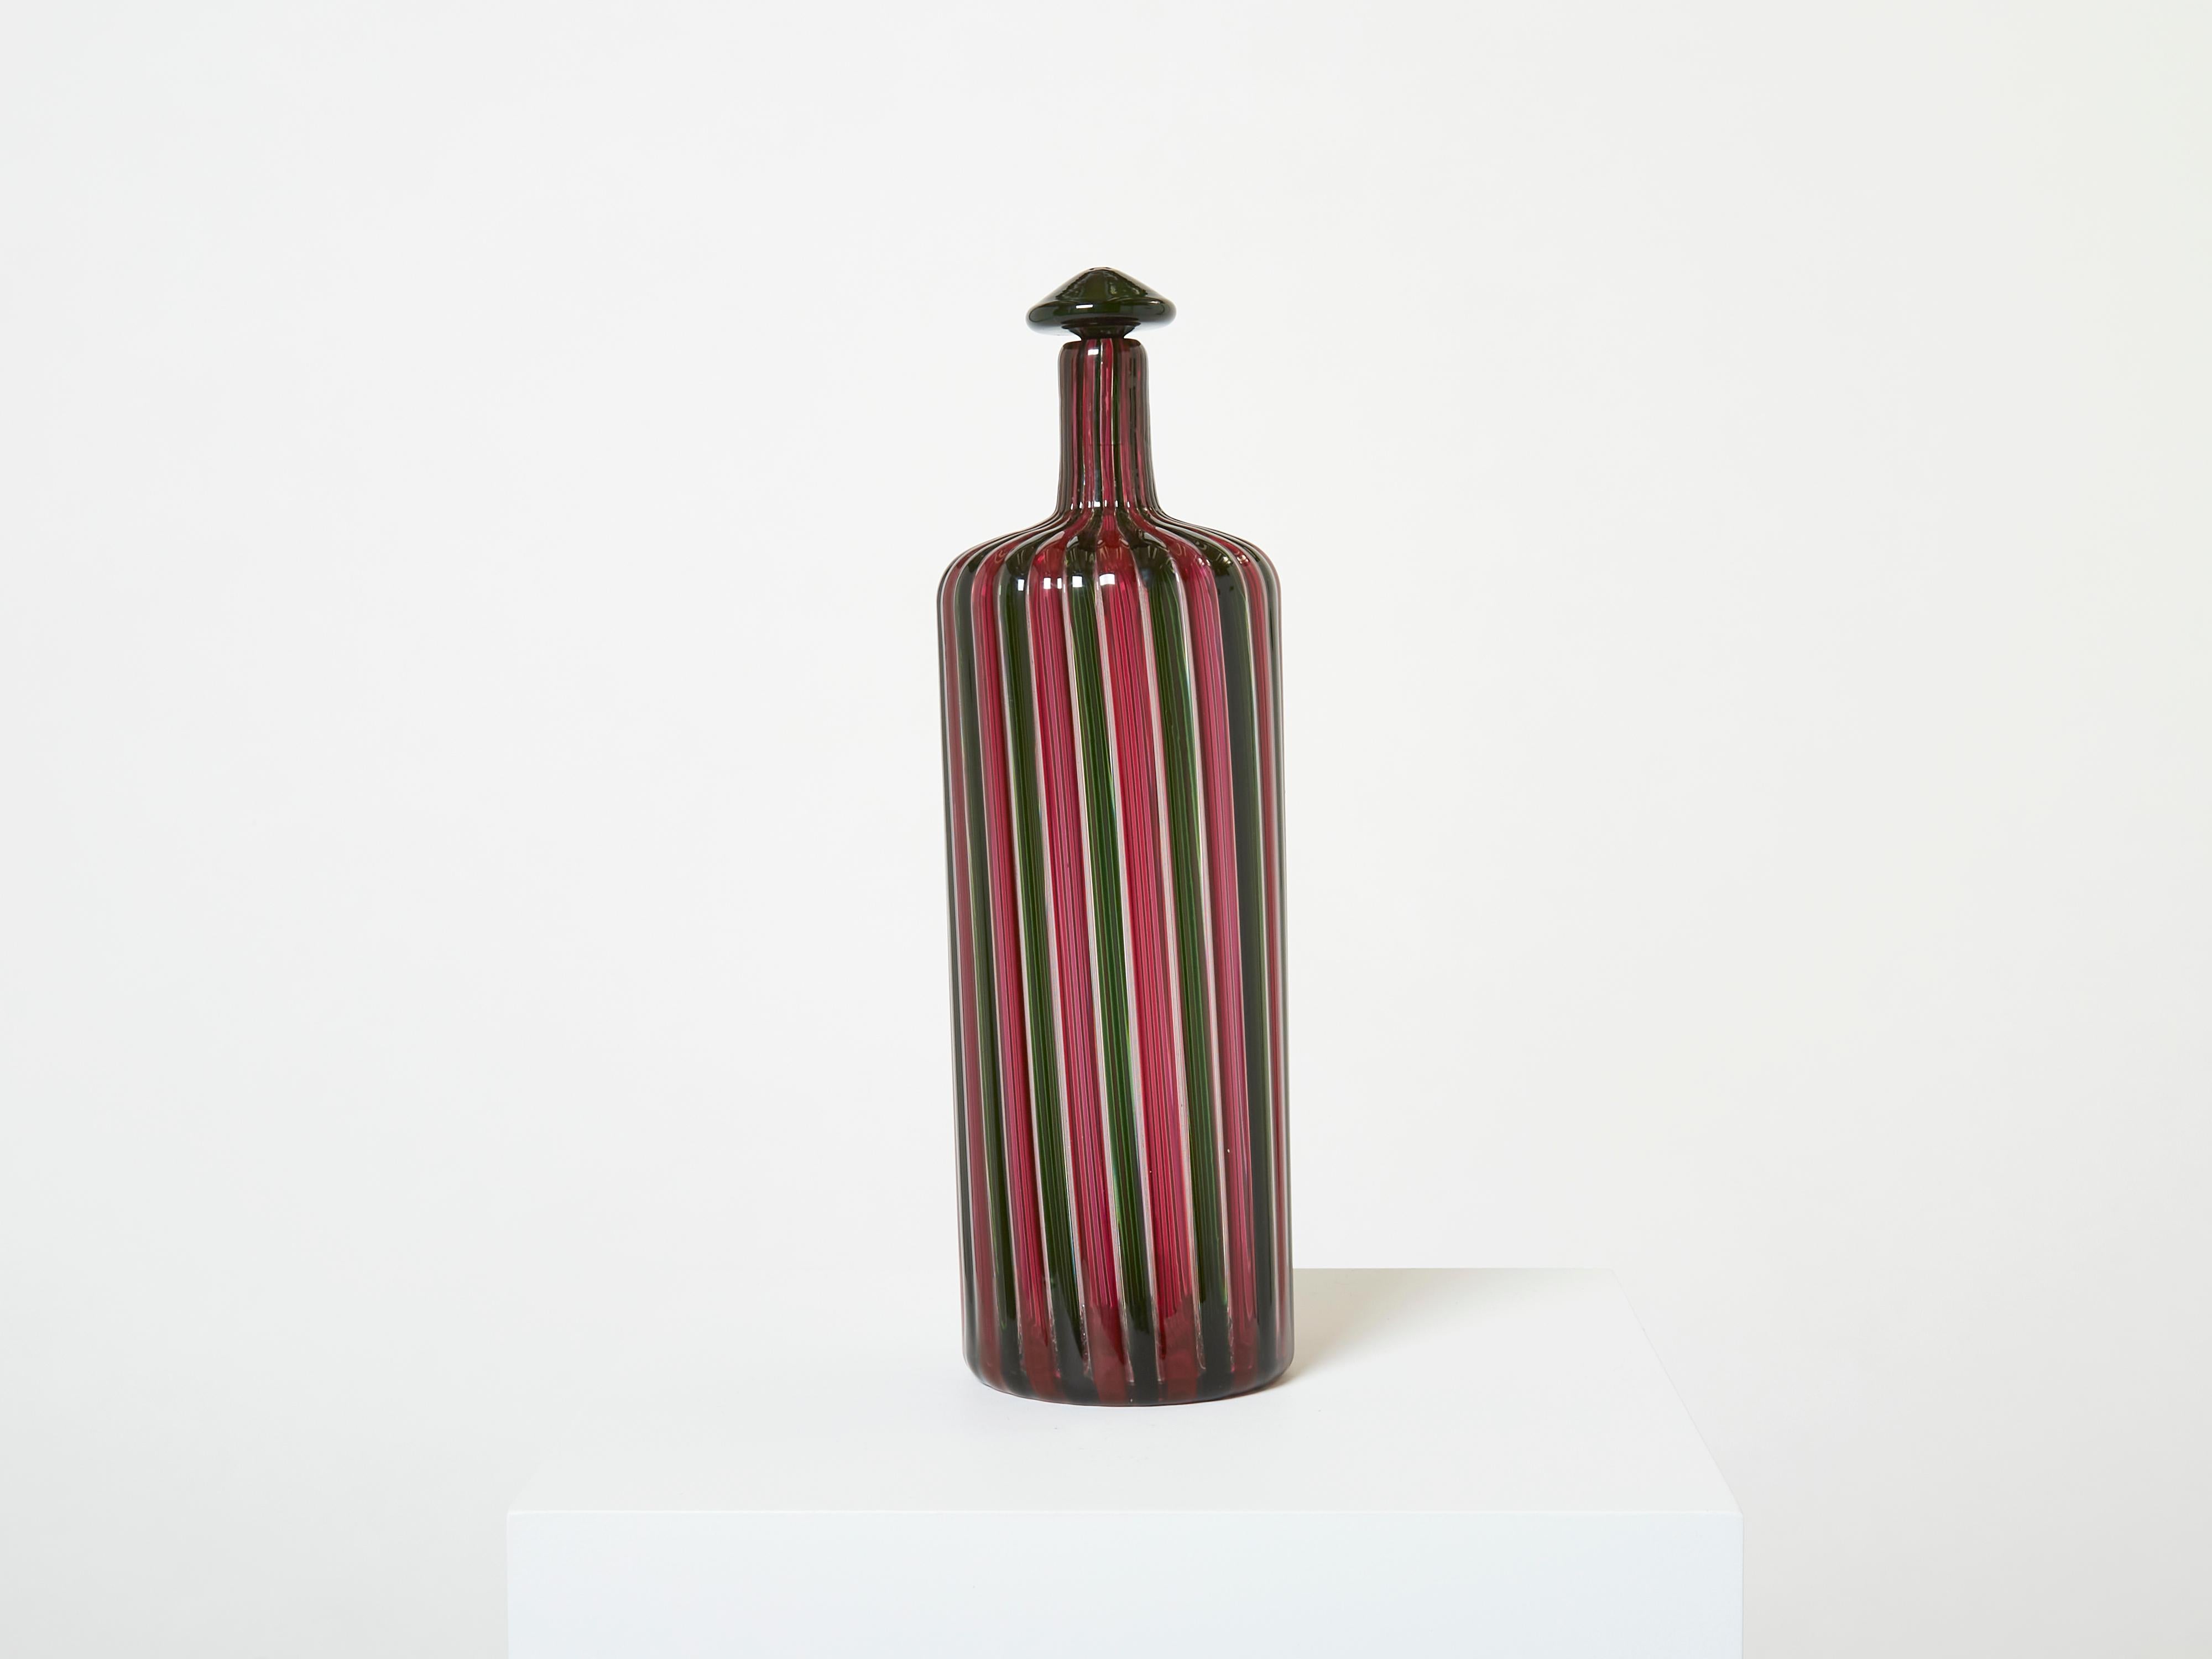 Rare Gio Ponti and Paolo Venini bottle for Venini designed in the 1950s, “ A Canne” model from the Morandiana series. This example is a 1980s edition, signed Venini 82, with its original stopper. This beautiful murano piece has eye-catching colors,